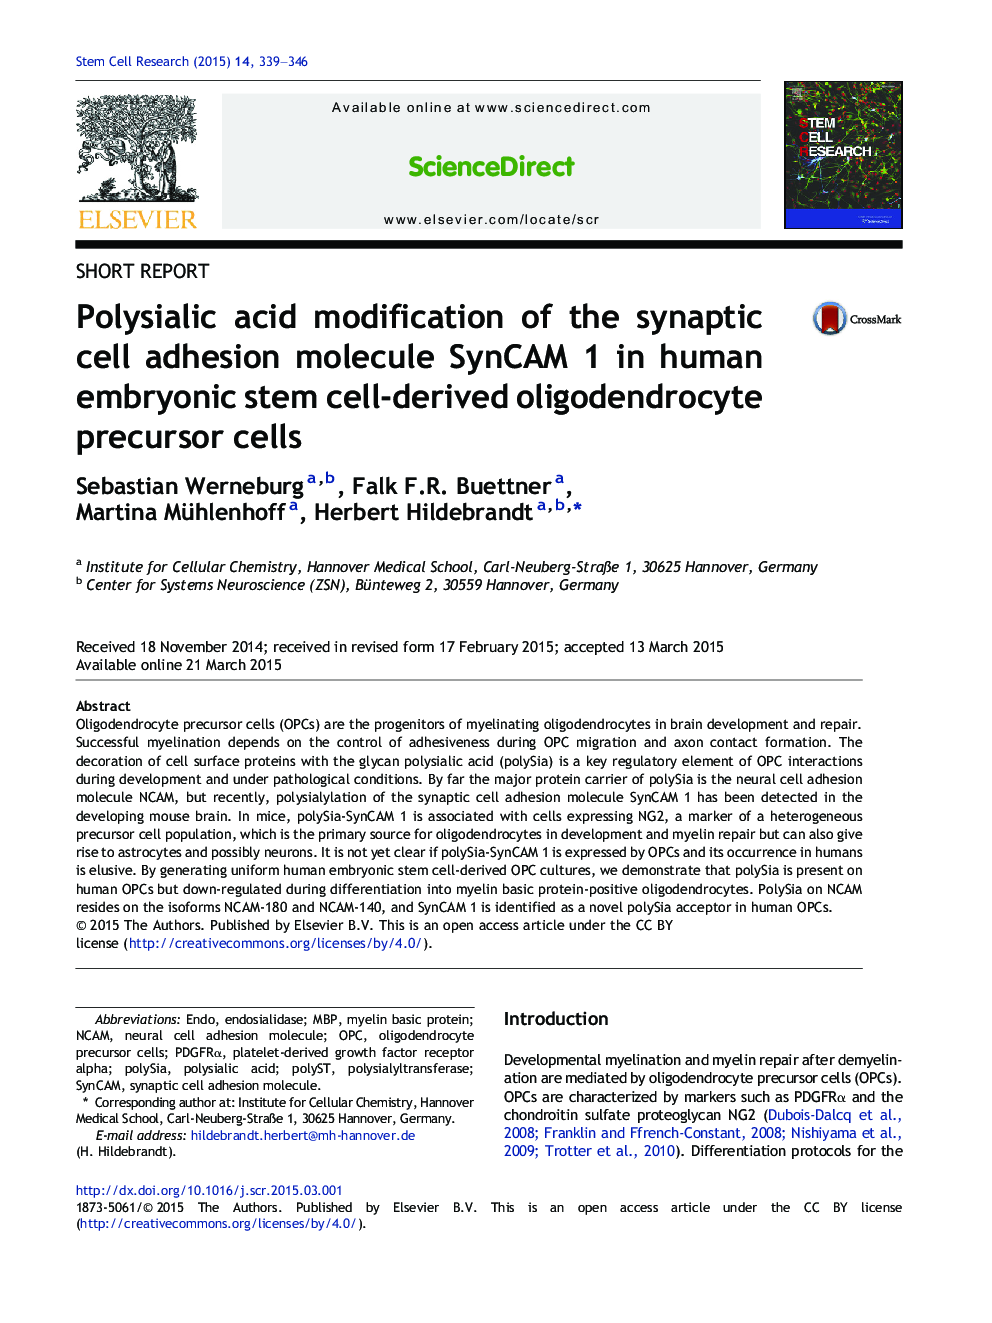 Polysialic acid modification of the synaptic cell adhesion molecule SynCAM 1 in human embryonic stem cell-derived oligodendrocyte precursor cells